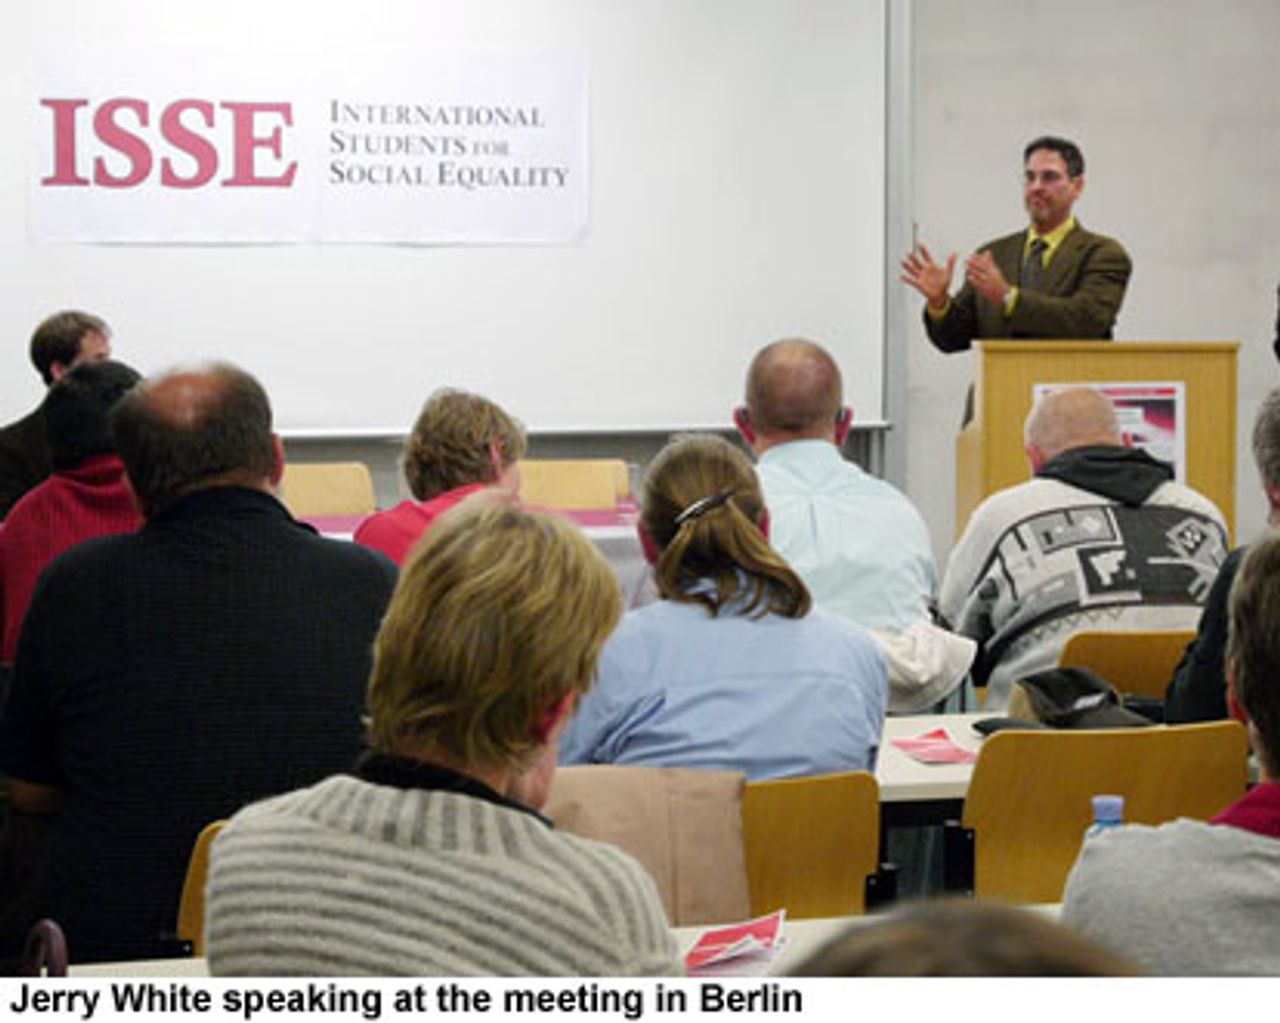 Jerry White speaking at the meeting in Berlin